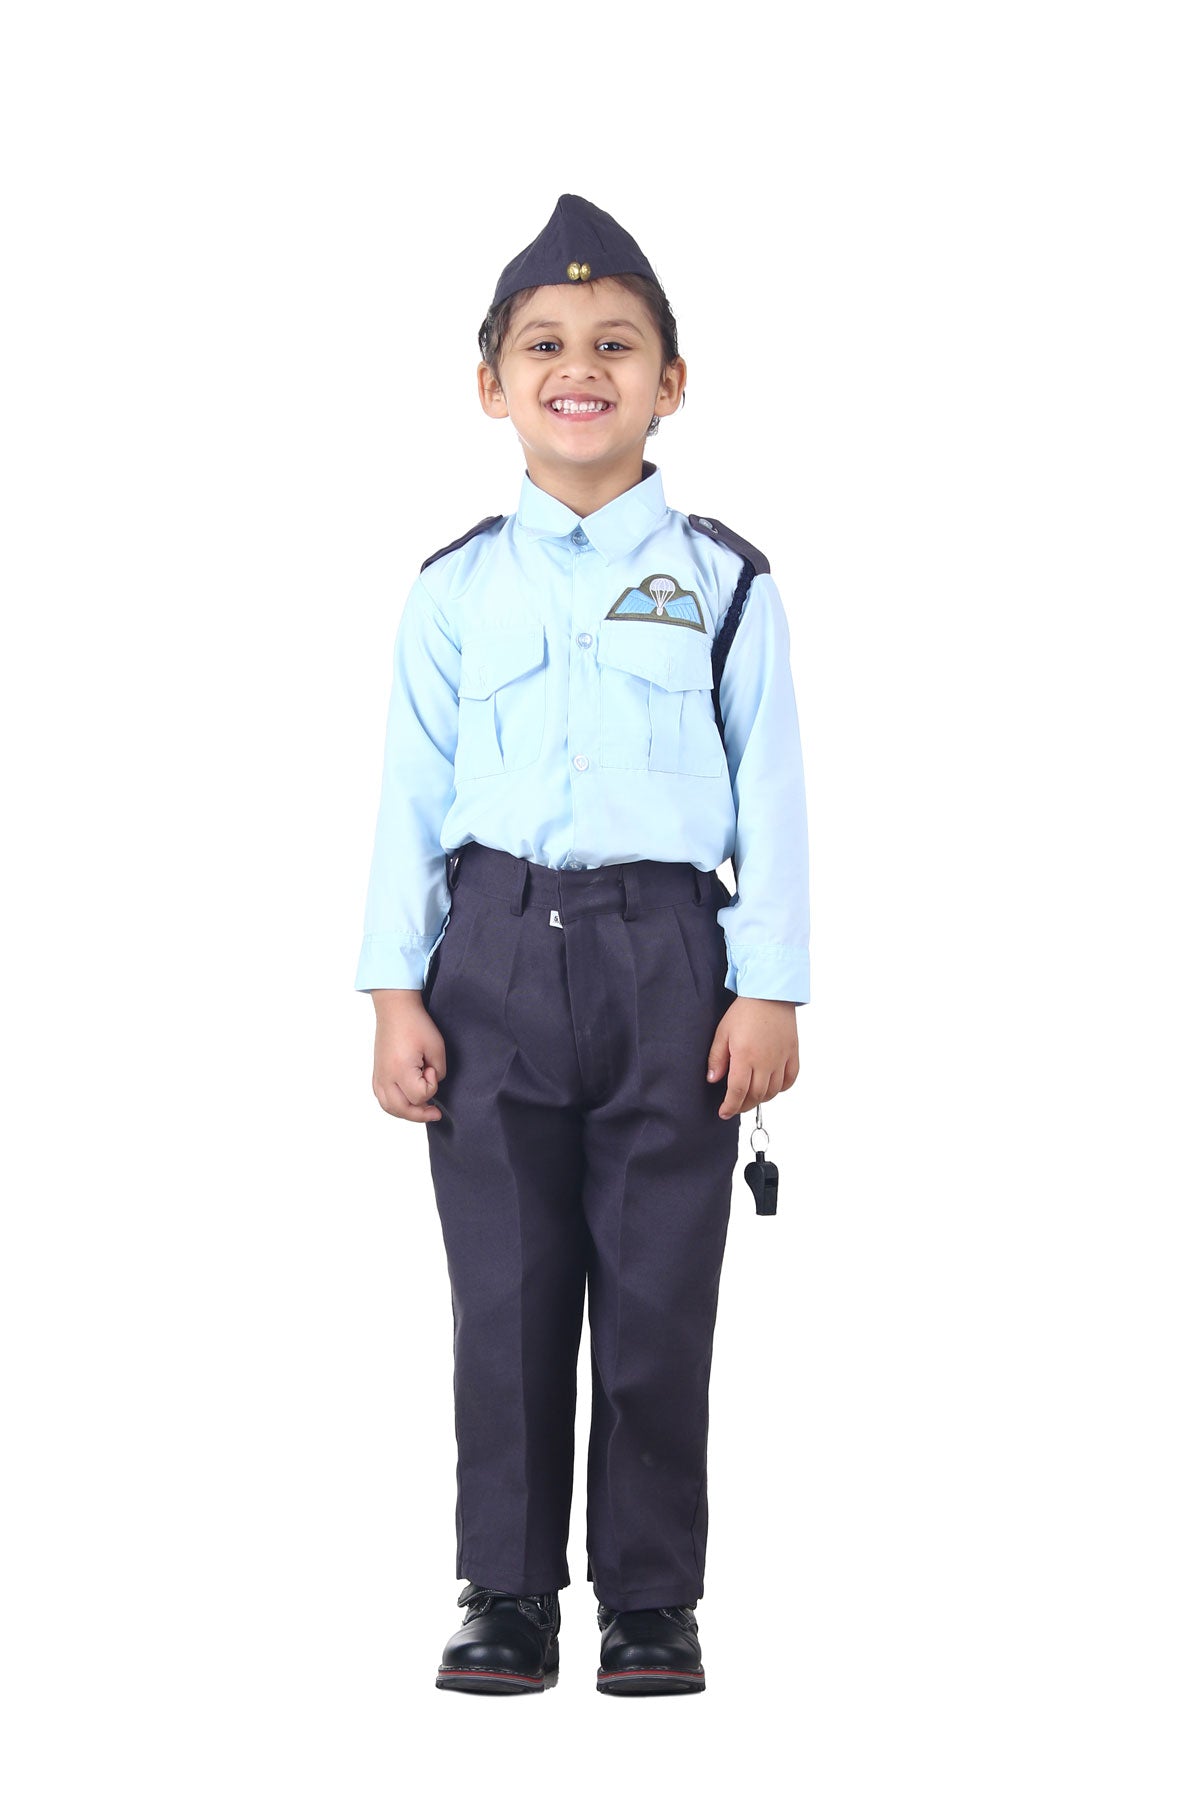 indian air force shirts online